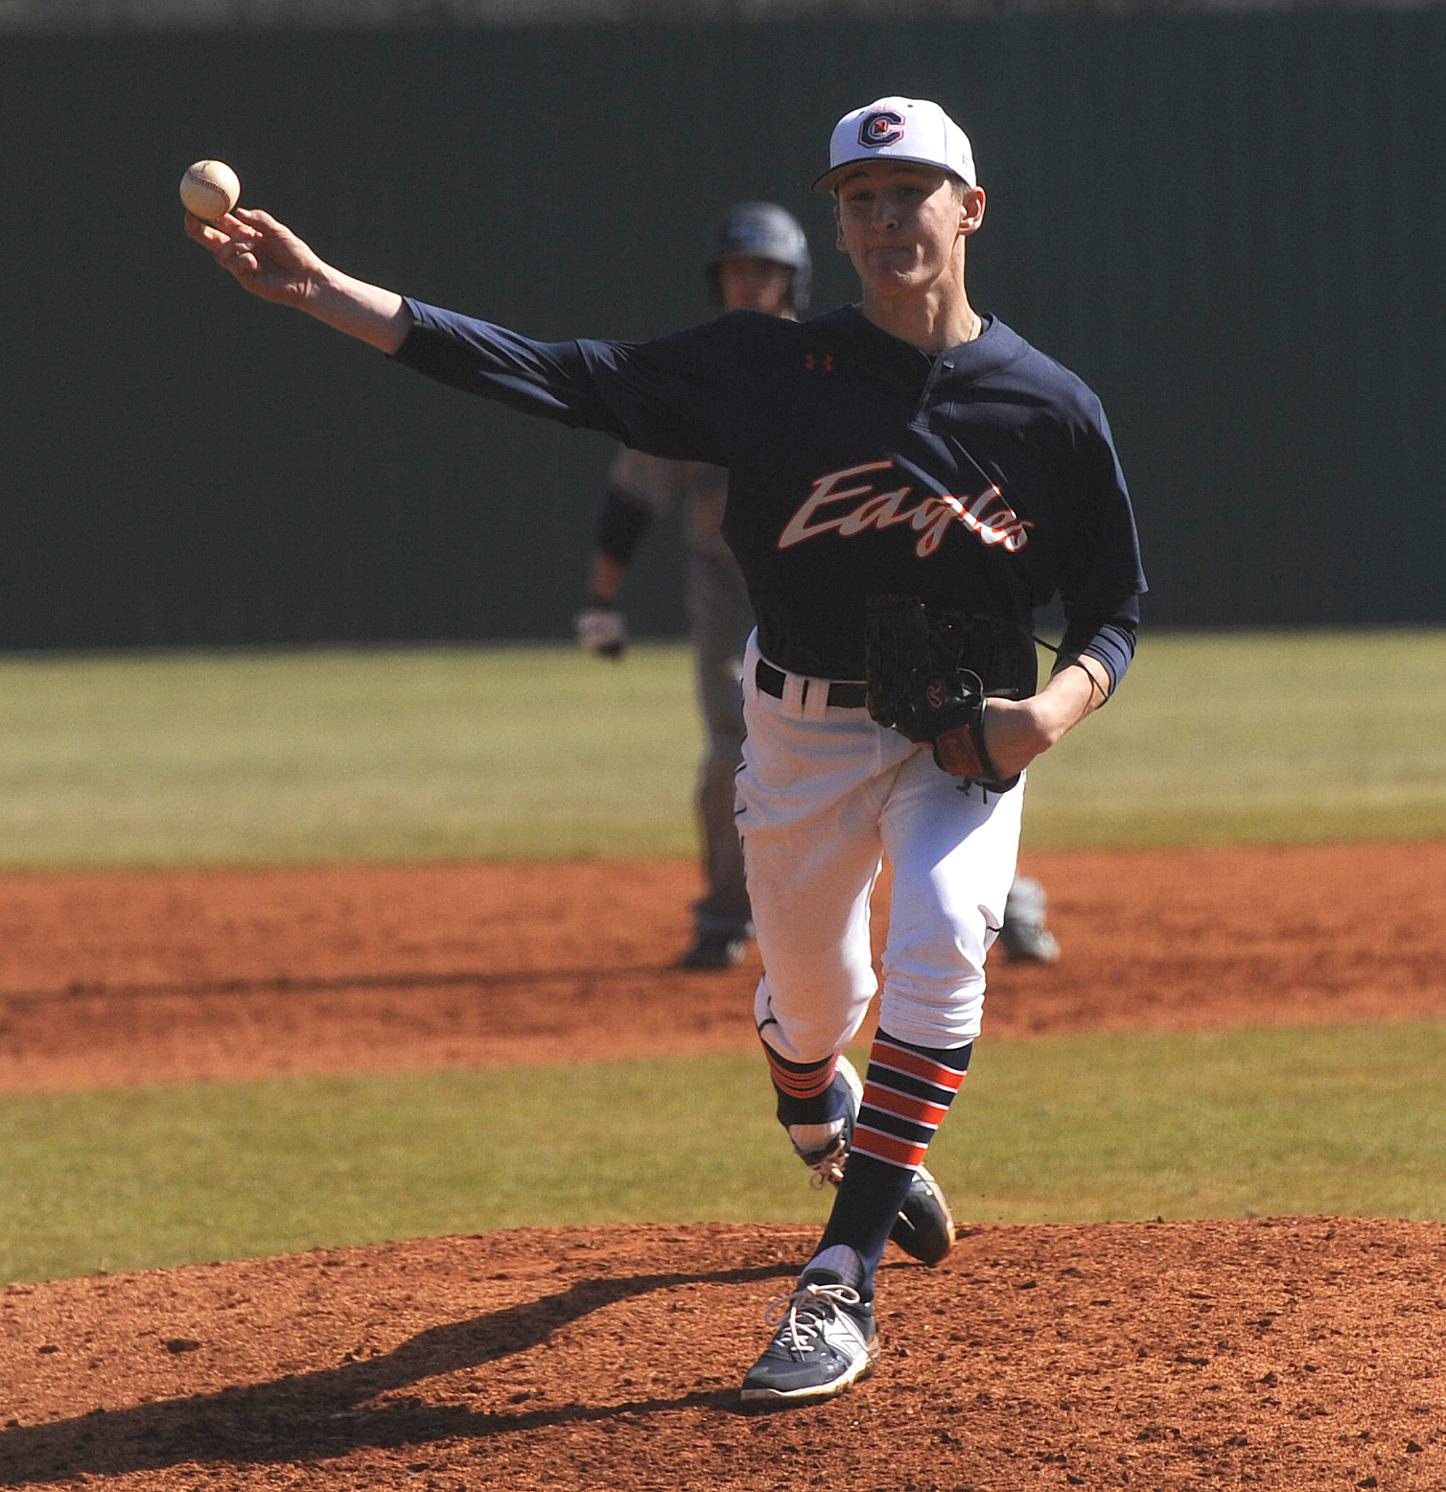 Dominant starting pitching helps Eagles to sweep of Bearcats